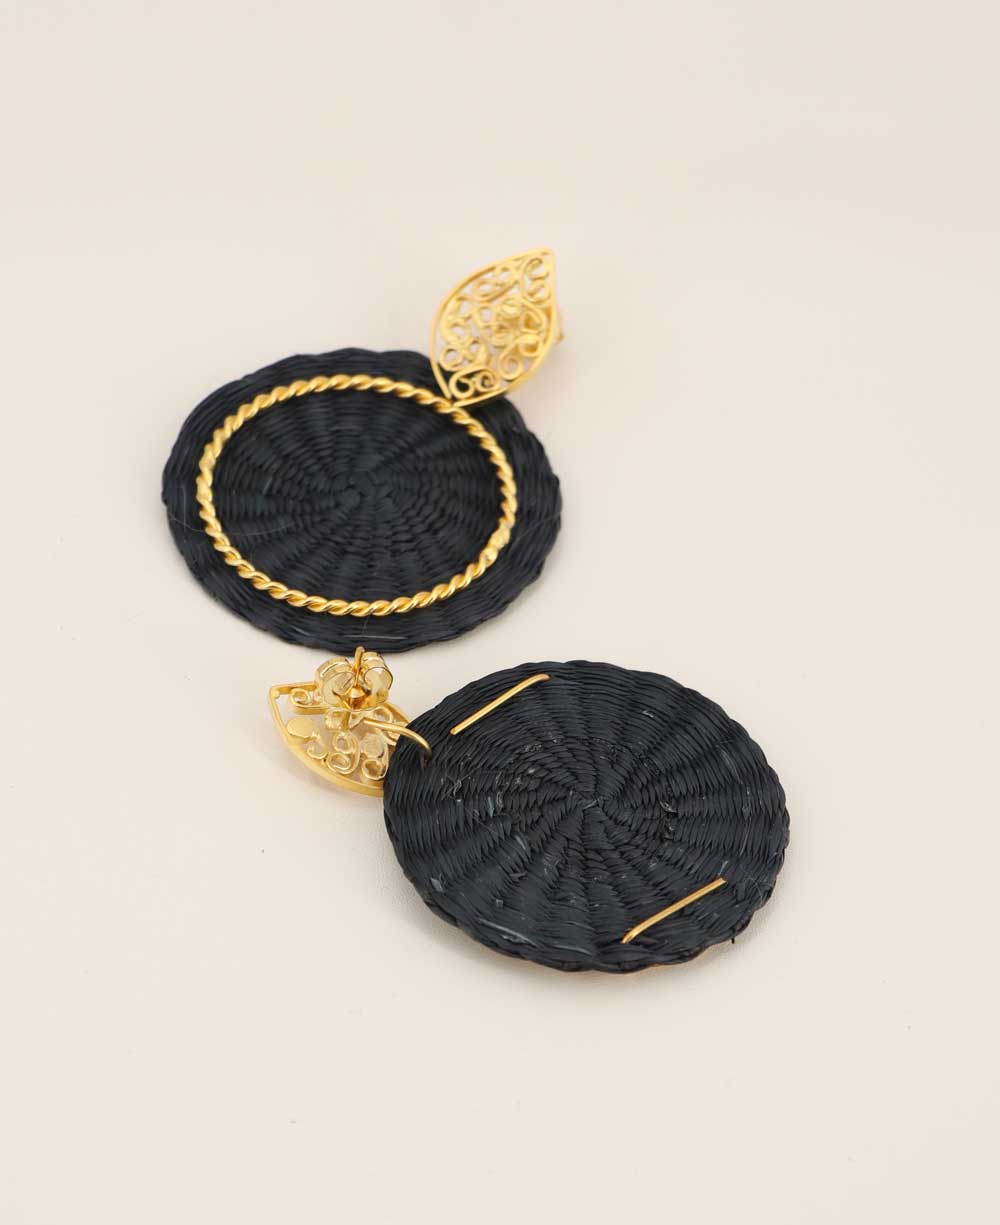 Colombian iraca palm earrings with gold plating